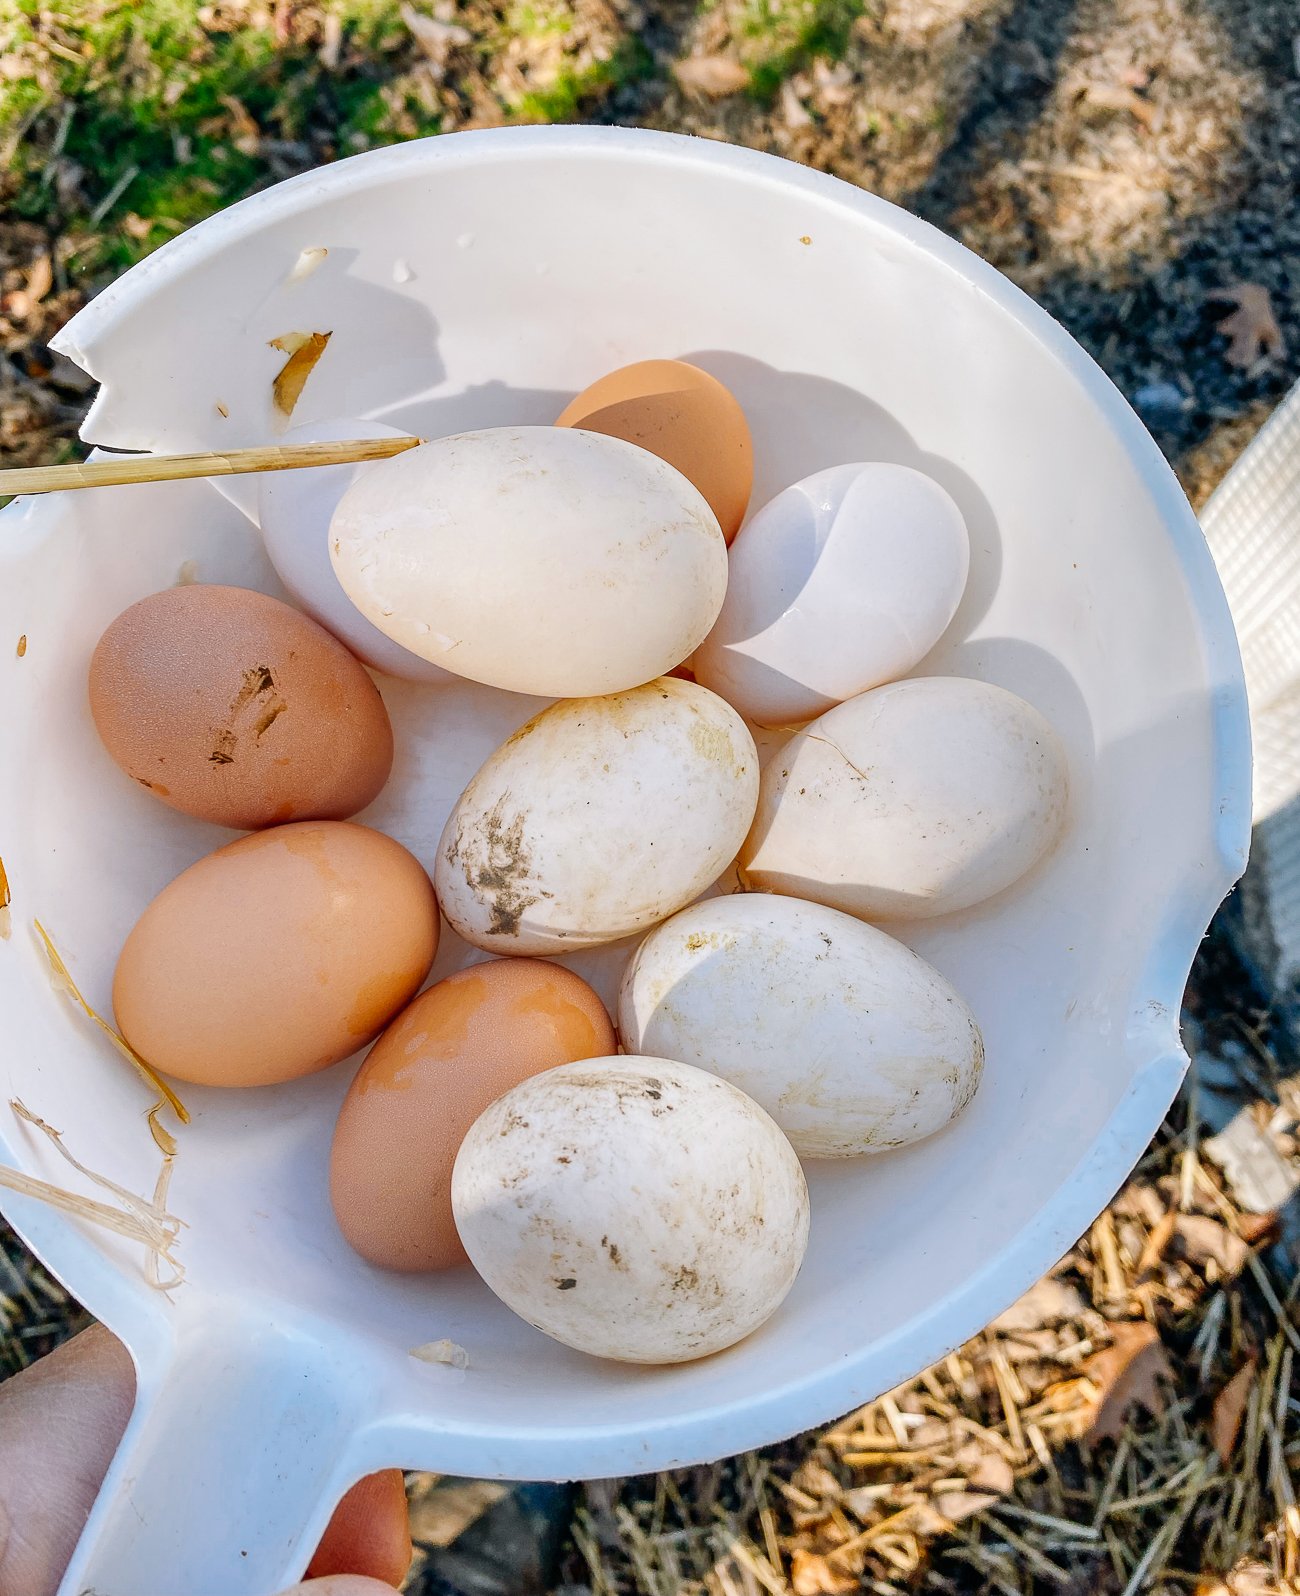 collected duck and chicken eggs